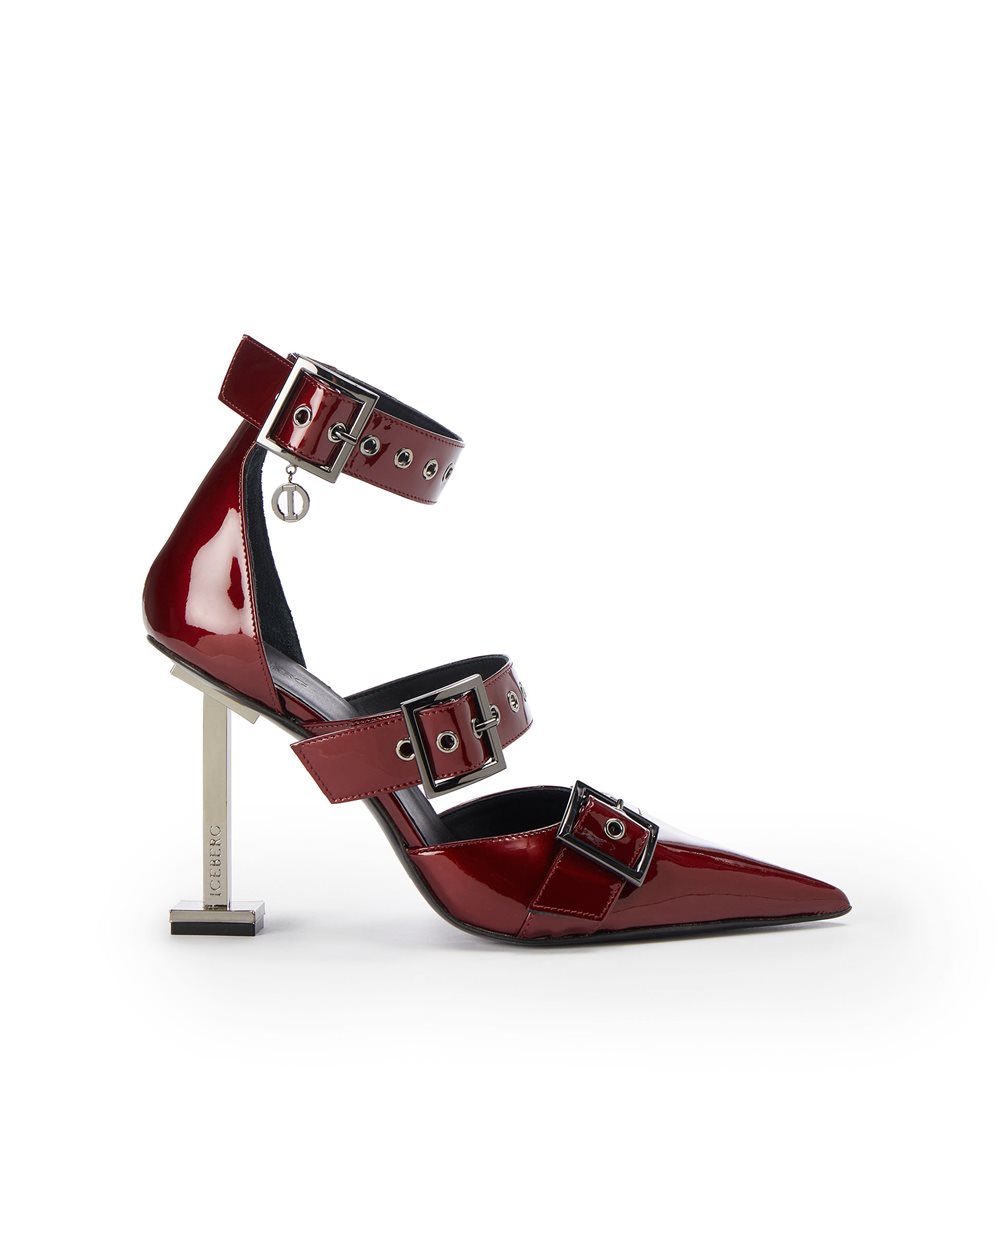 Pumps with iconic heel - carosello HP woman accessories | Iceberg - Official Website